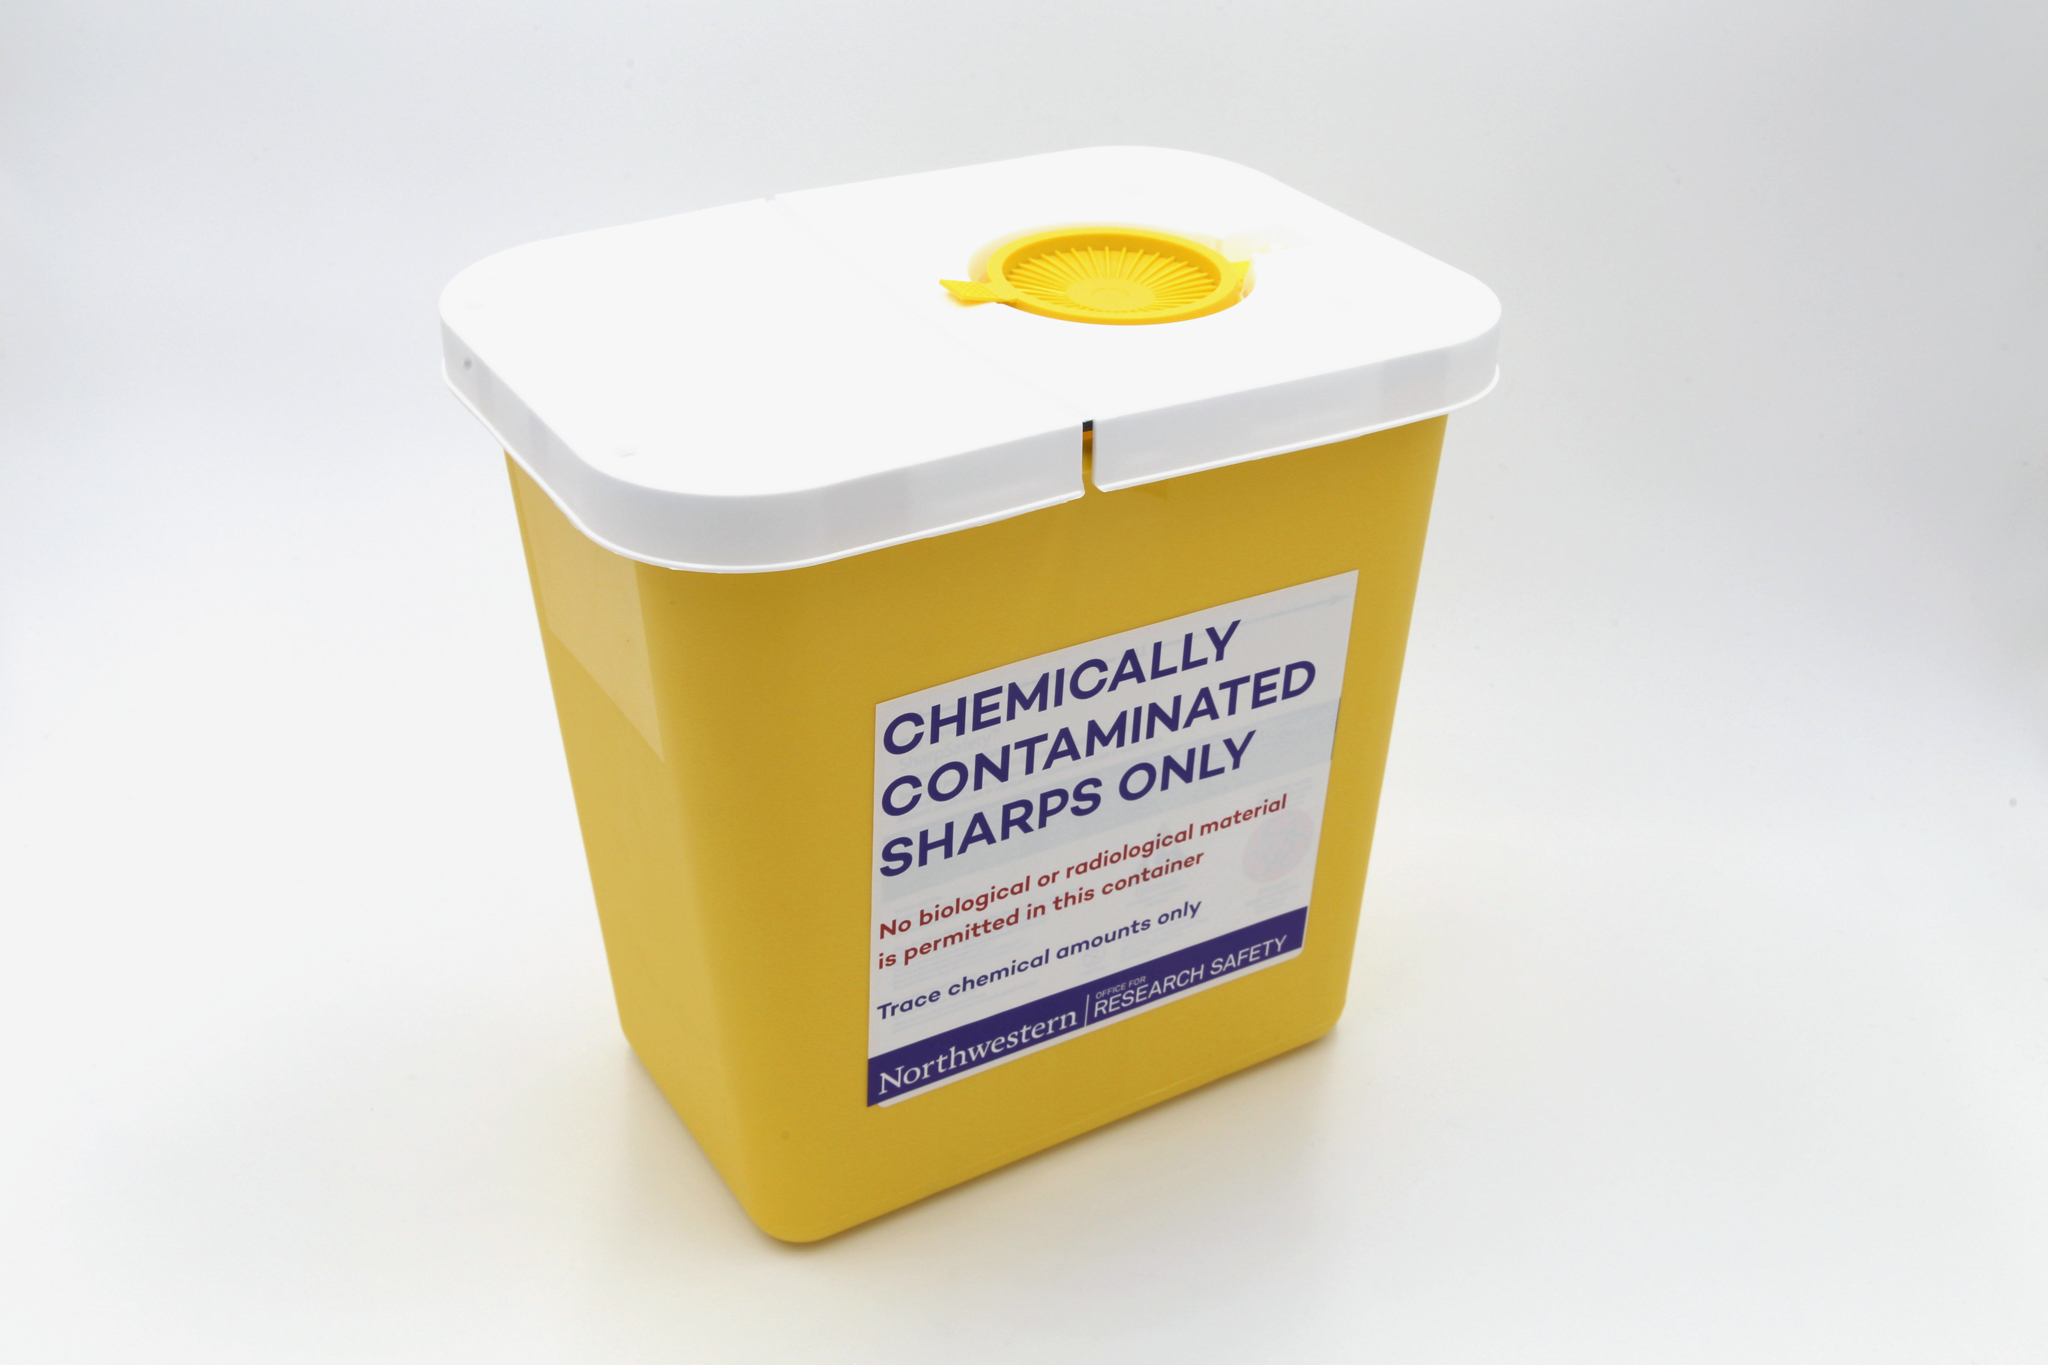 Plastic yellow box with "chemically contaminated sharps" label